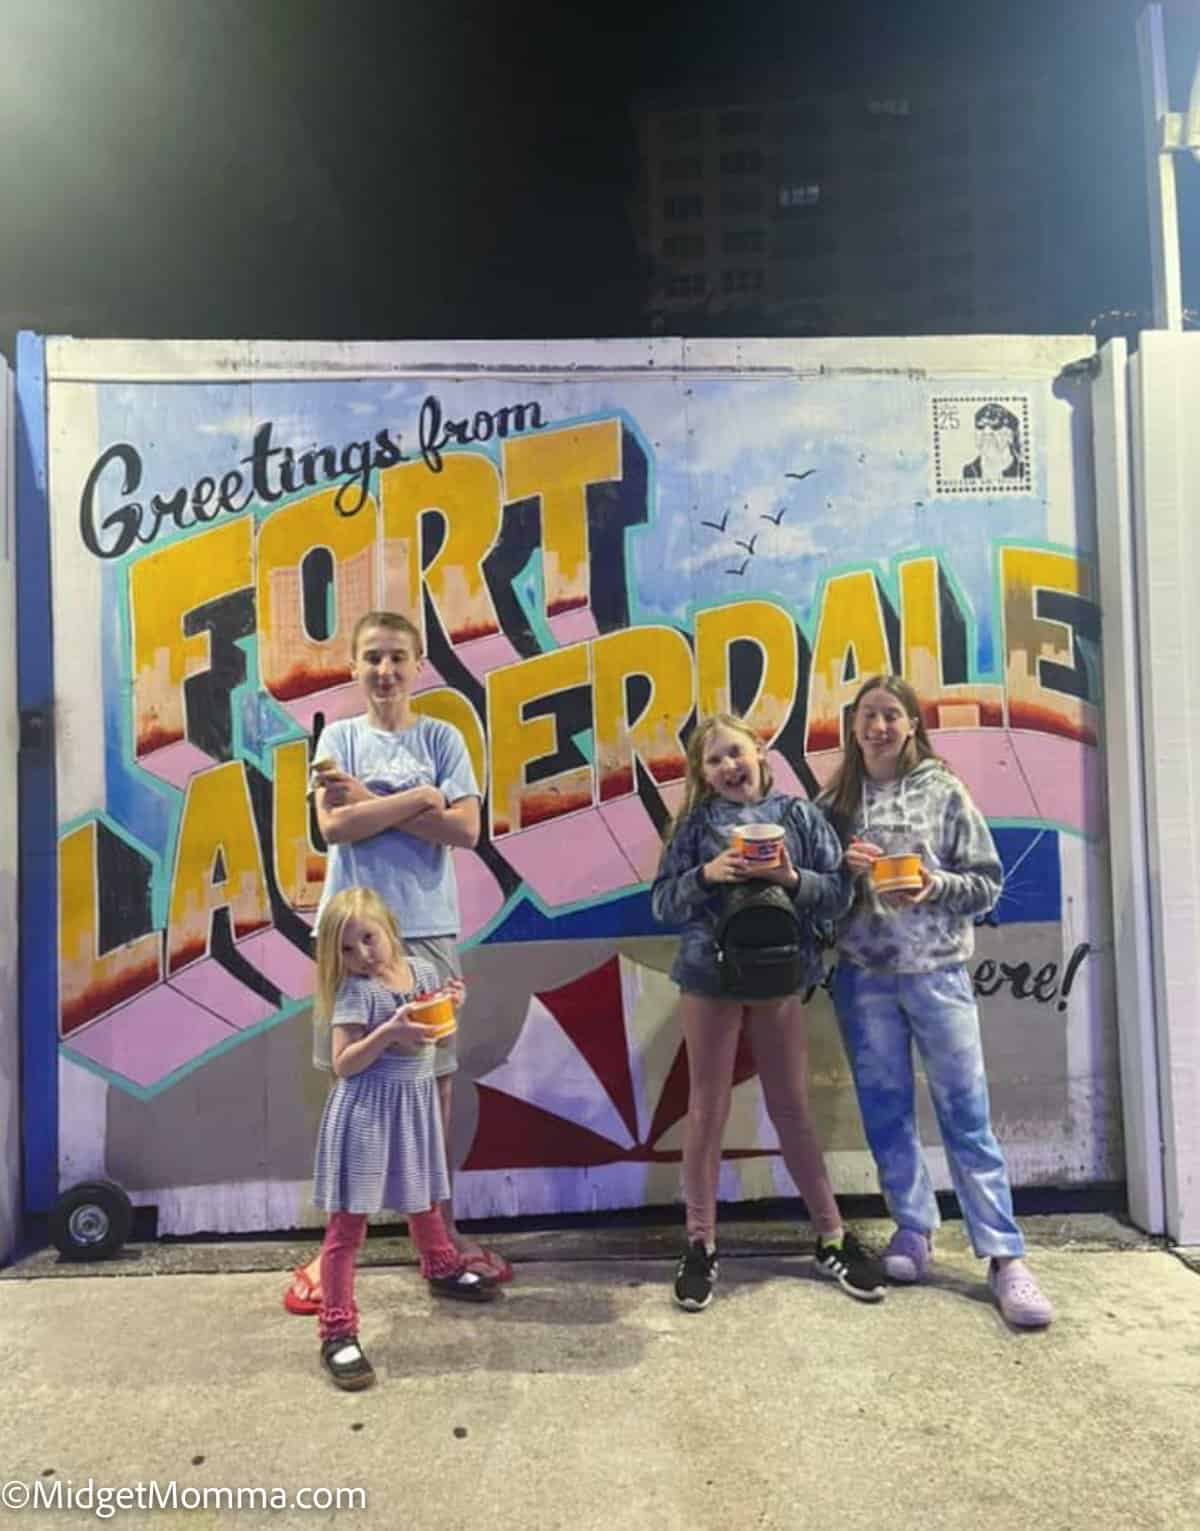 Things to do in Fort Lauderdale Florida - greetings from fortlauderdale sign with kids standing in front of it